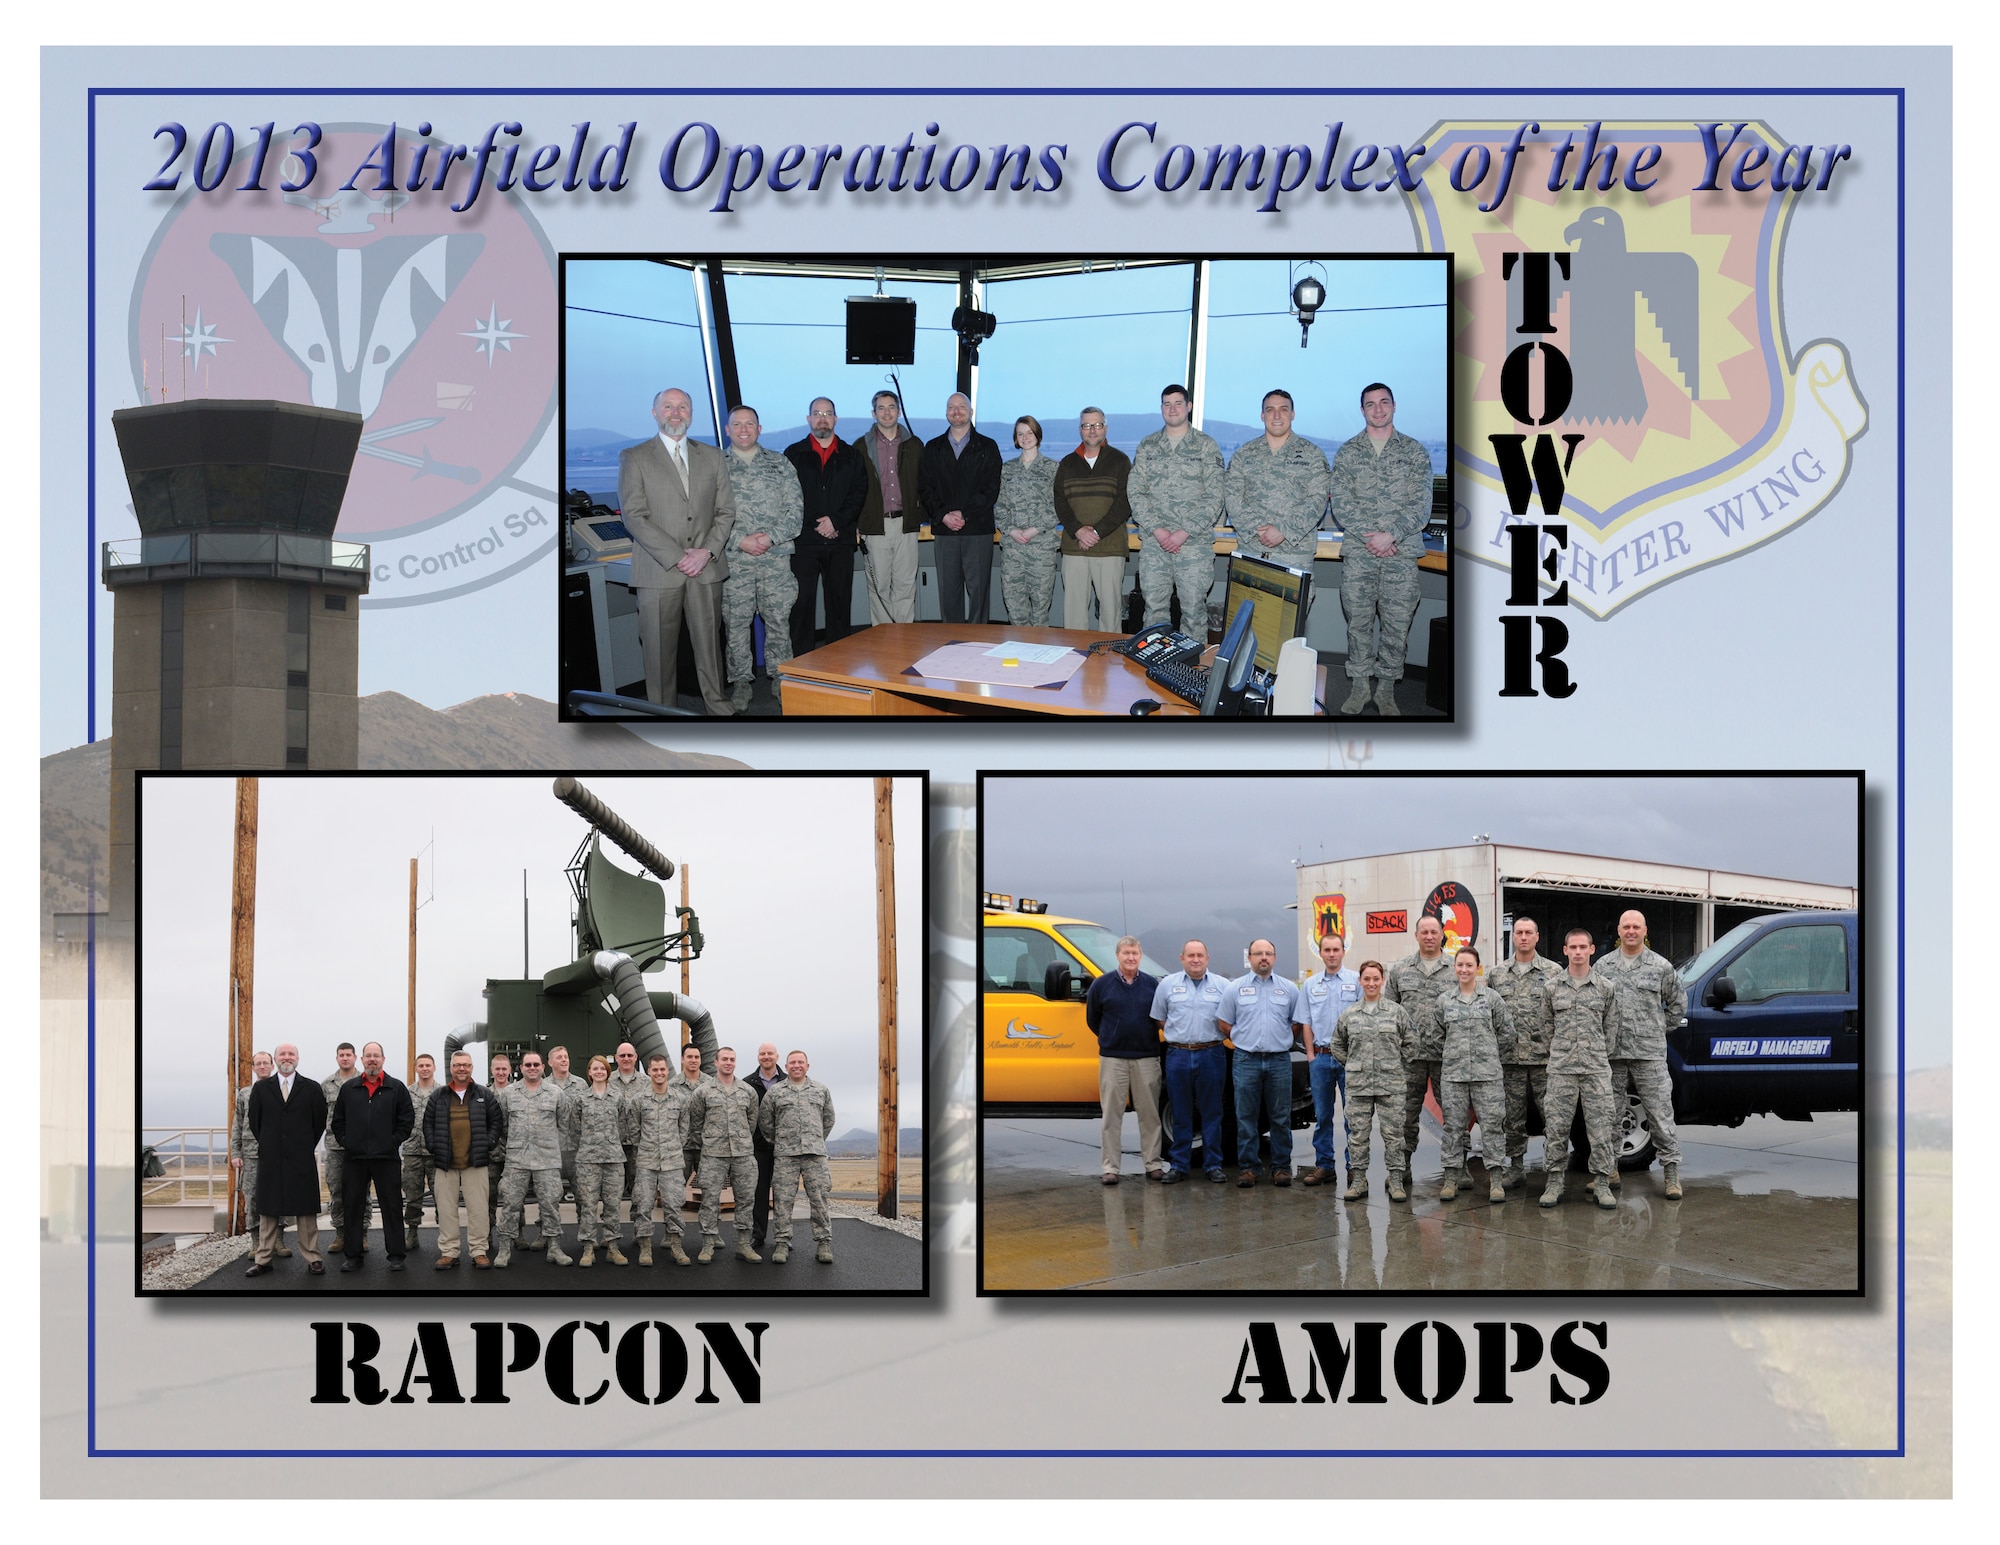 The 270th Air Traffic Control Squadron and 173rd Fighter Wing Air Field Management Operations were recognized as the Airfield Operations Complex of the Year for 2013.  (U.S. Air National Guard illustration by Tech. Sgt. Jefferson Thompson/Released).